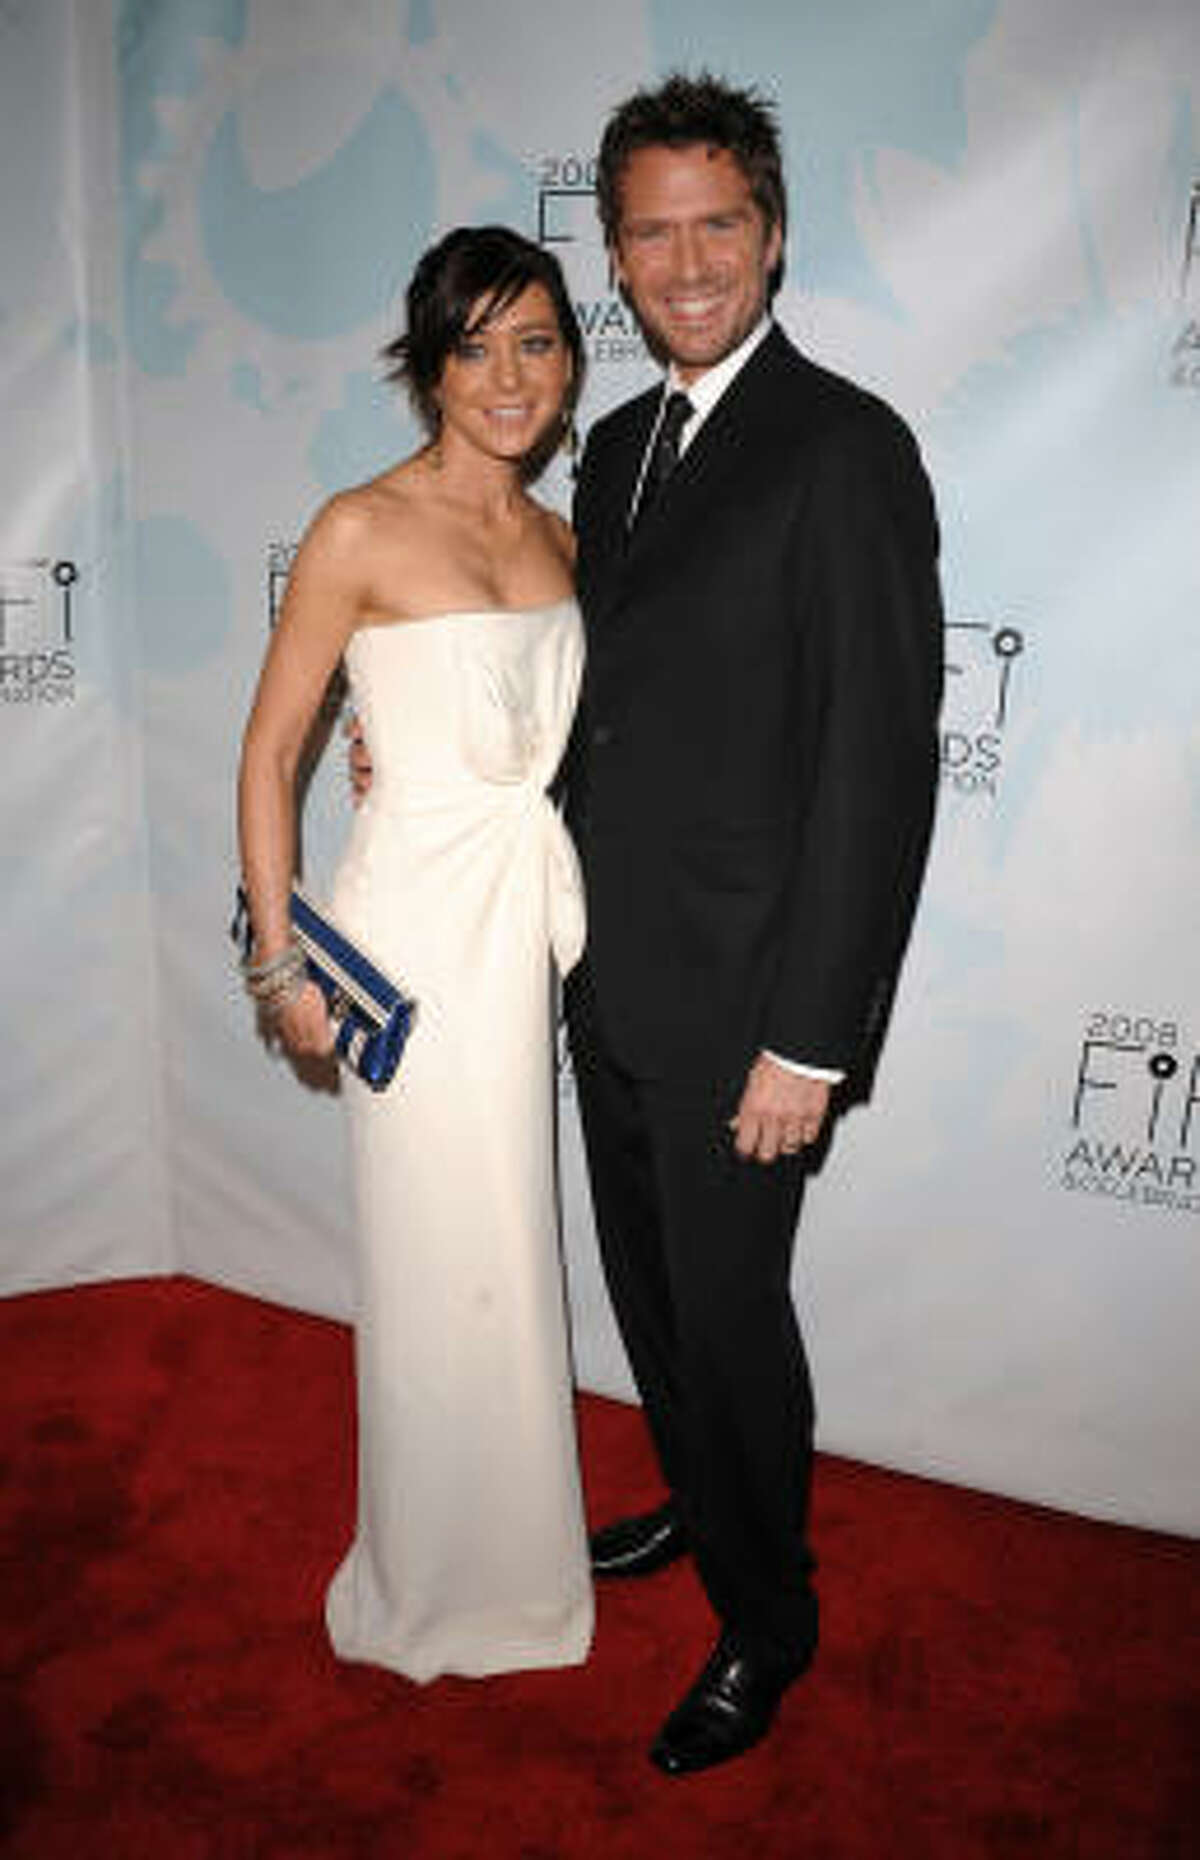 Alyson Hannigan and her husband, actor Alexis Denisof, announced Oct. 22 that they are expecting.